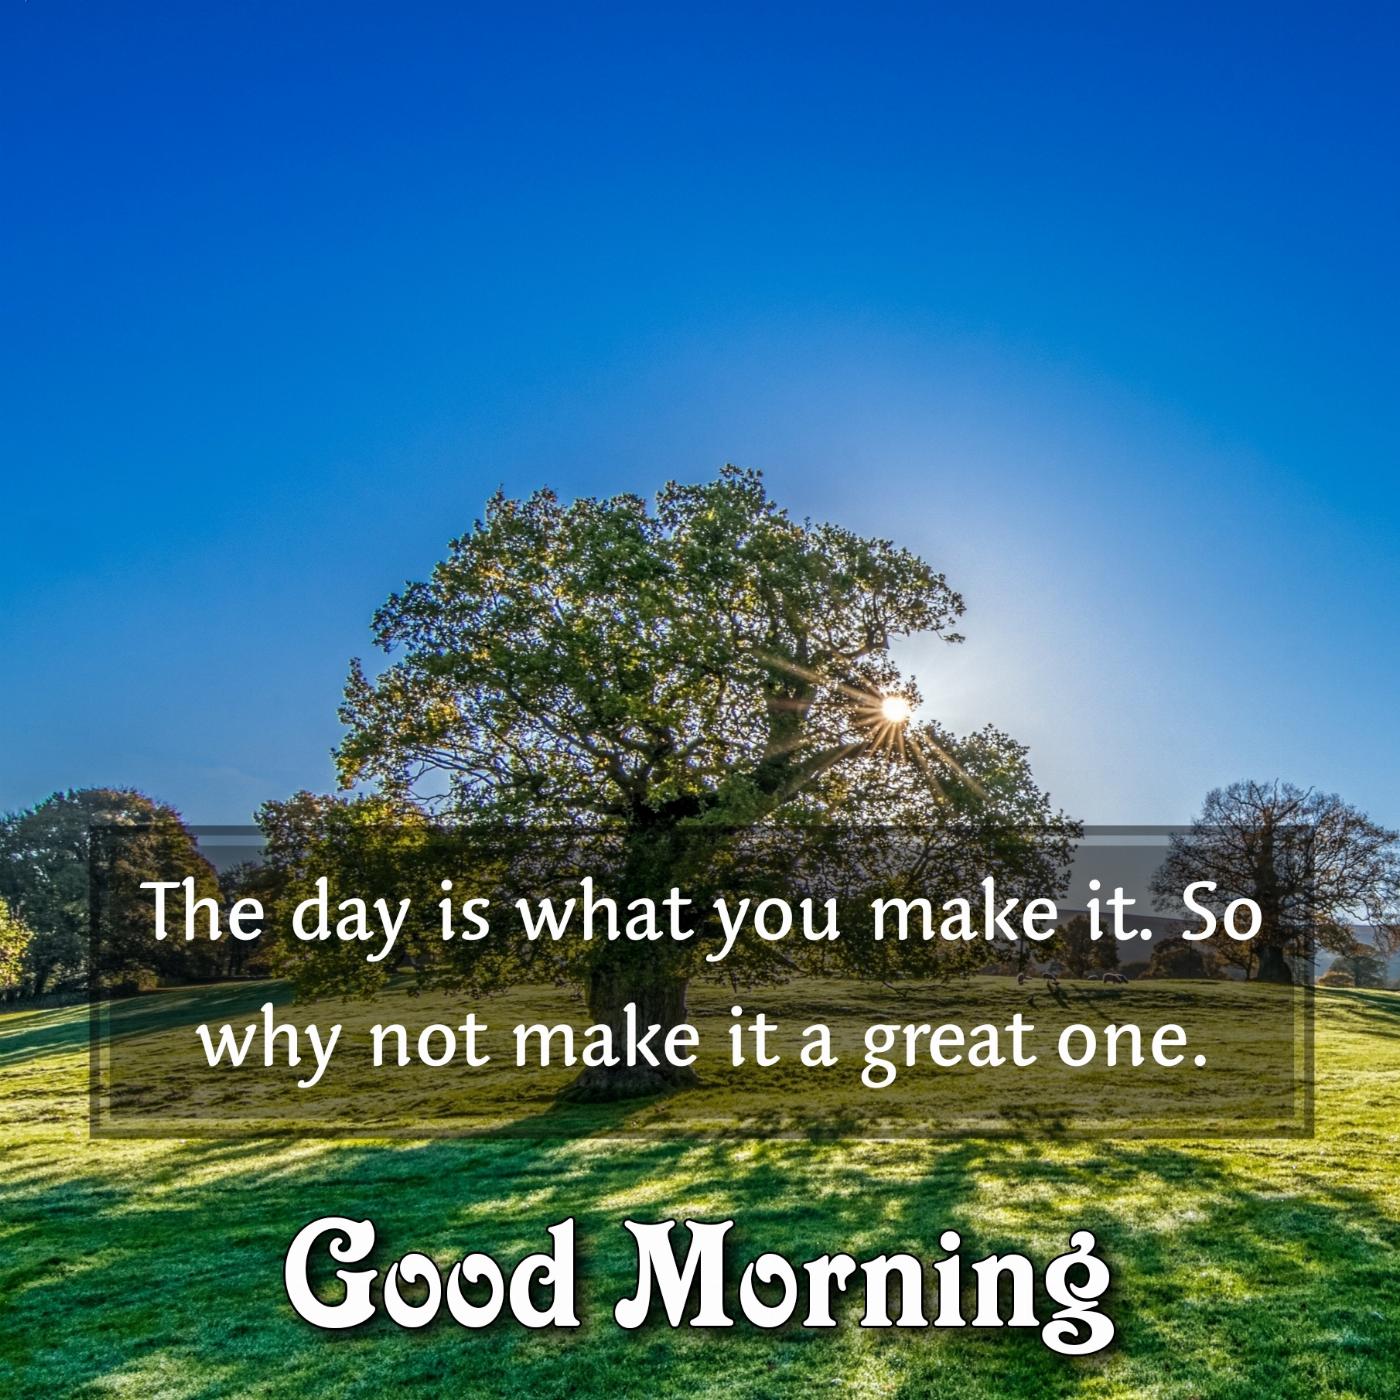 The day is what you make it So why not make it a great one